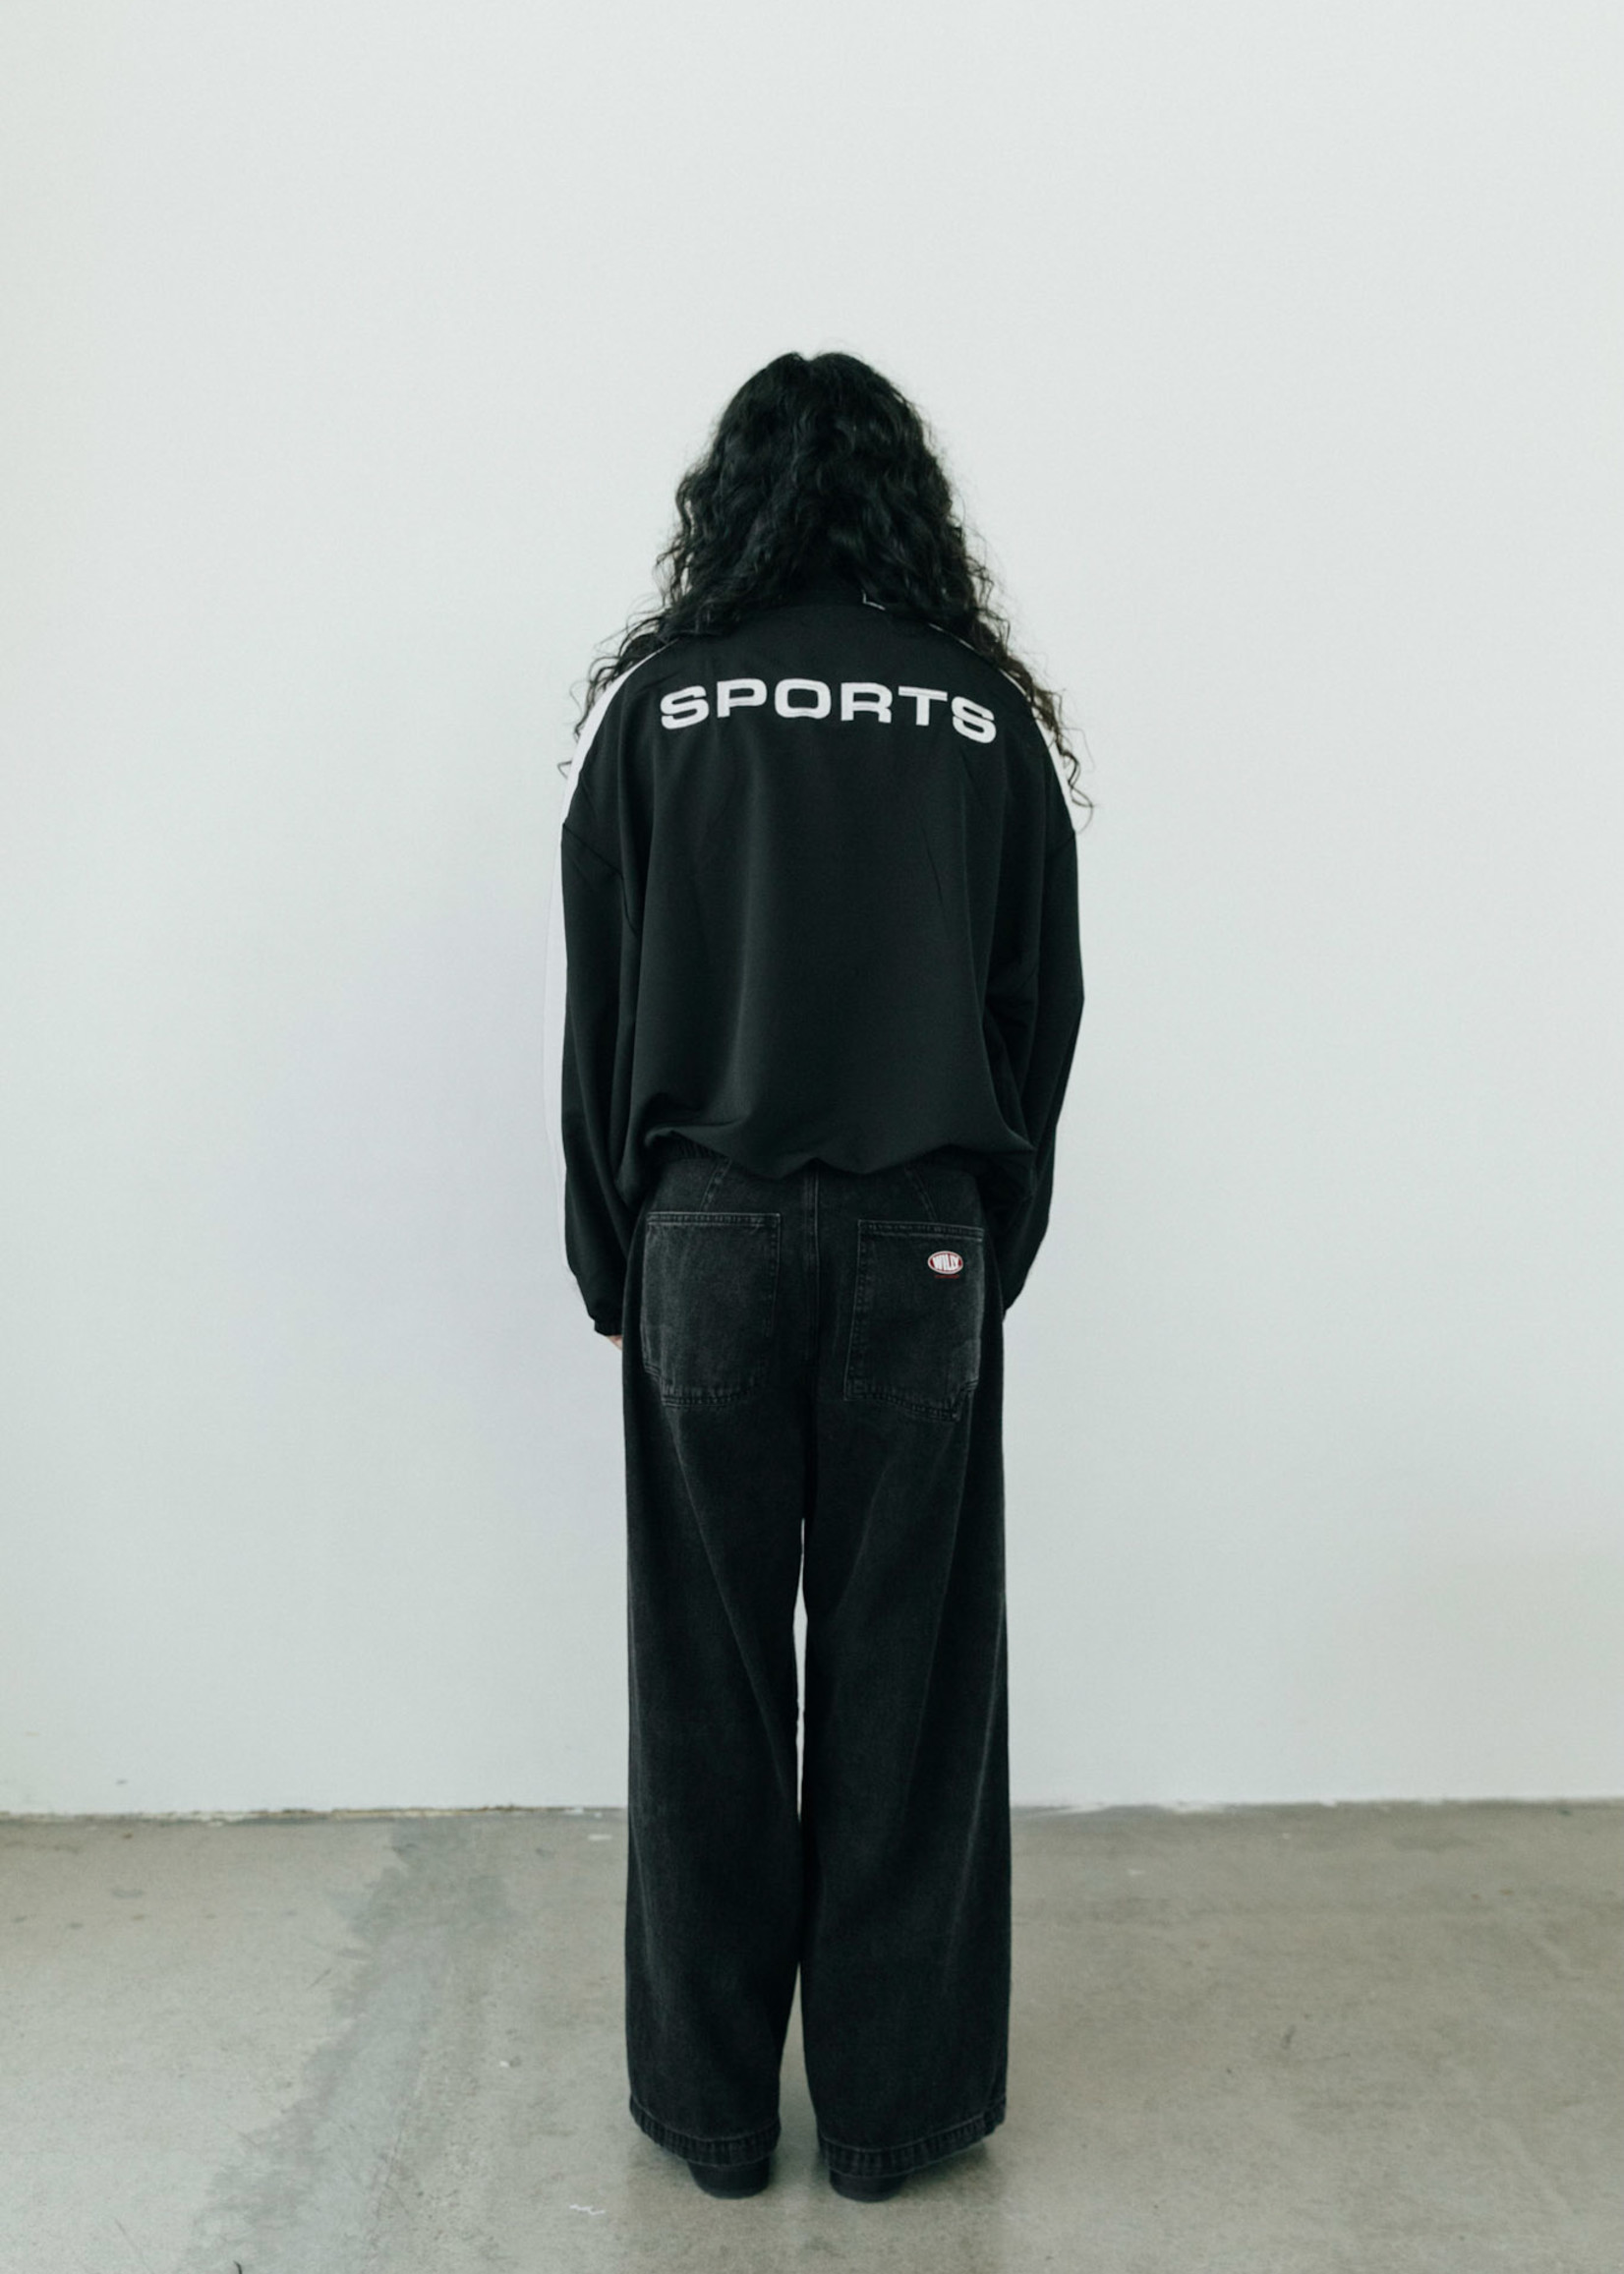 WILLY CHAVARRIA Pregame Track Jacket in Black and White